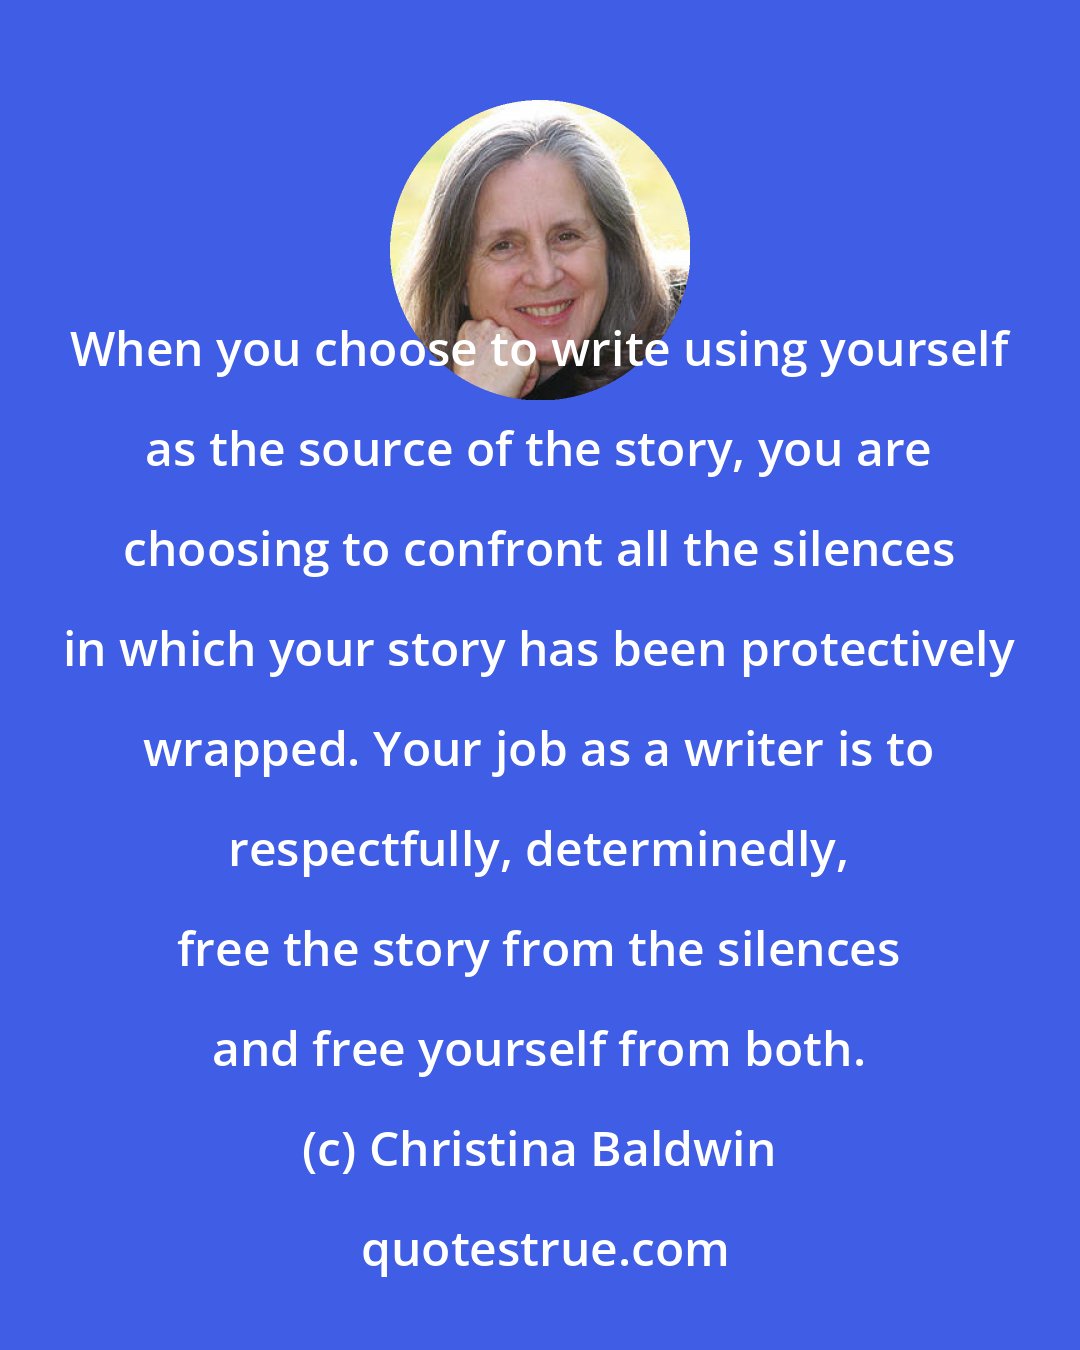 Christina Baldwin: When you choose to write using yourself as the source of the story, you are choosing to confront all the silences in which your story has been protectively wrapped. Your job as a writer is to respectfully, determinedly, free the story from the silences and free yourself from both.